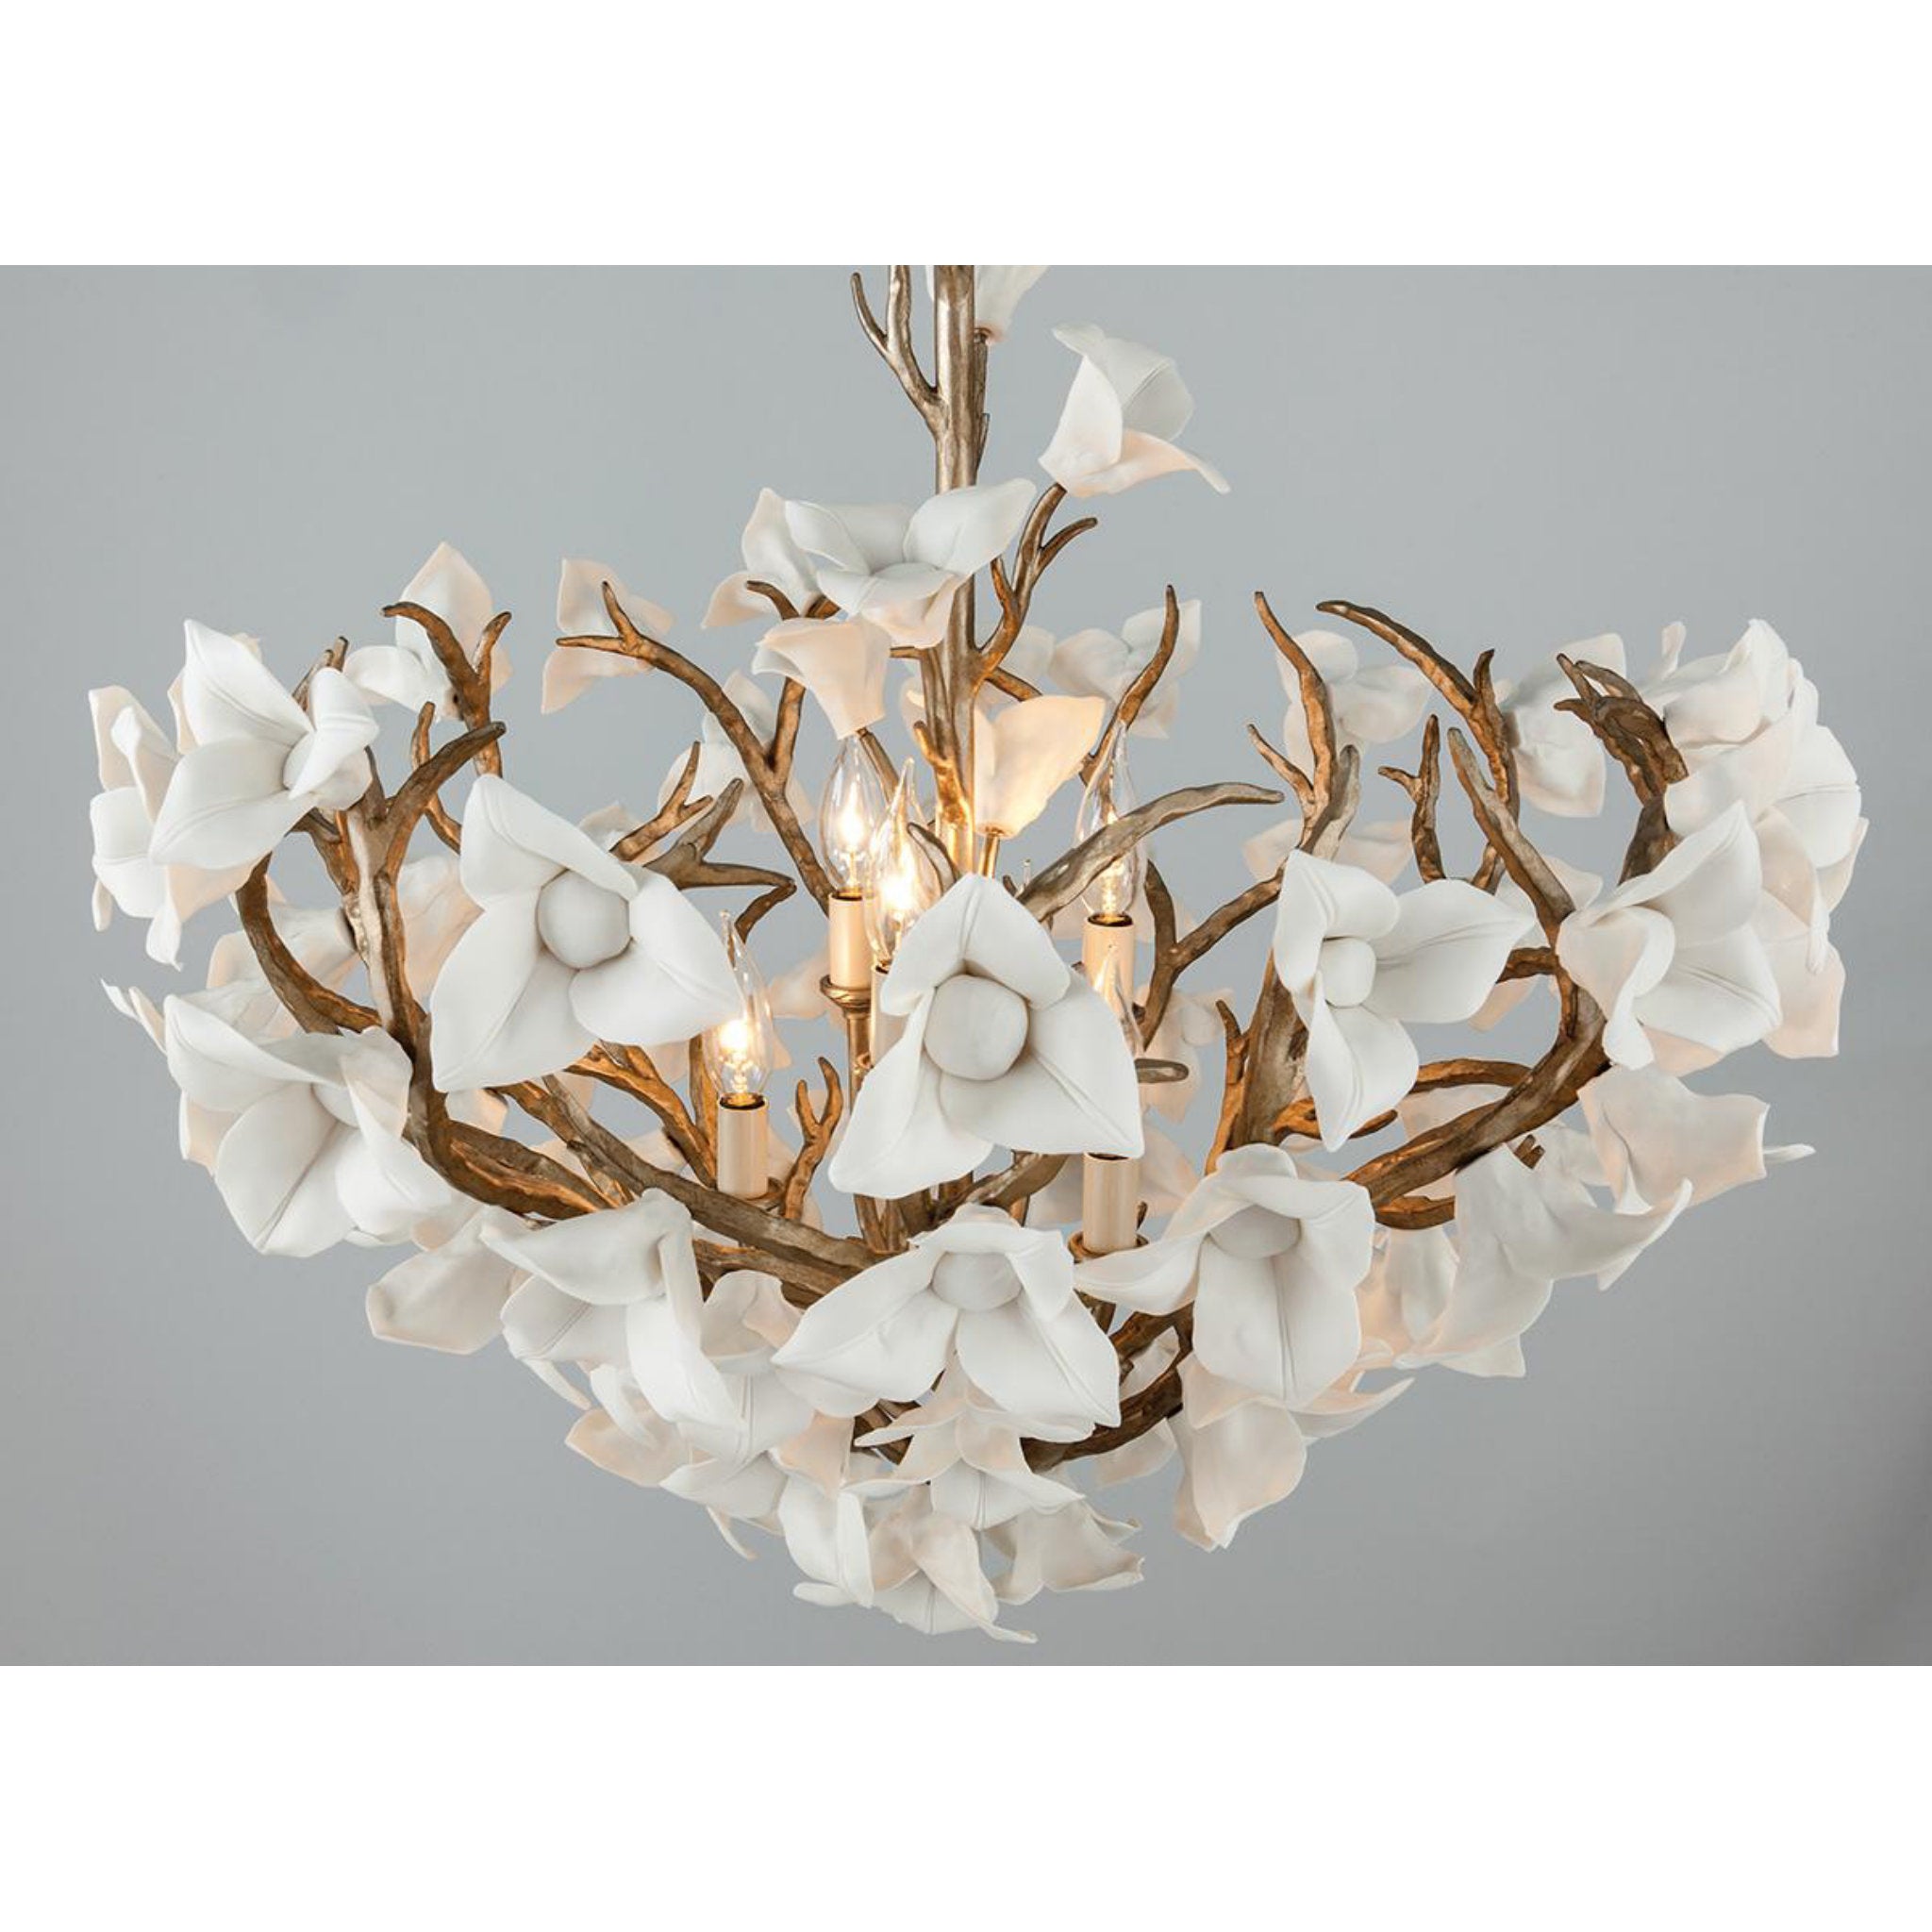 Lily 4 Light Chandelier in Enchanted Silver Leaf